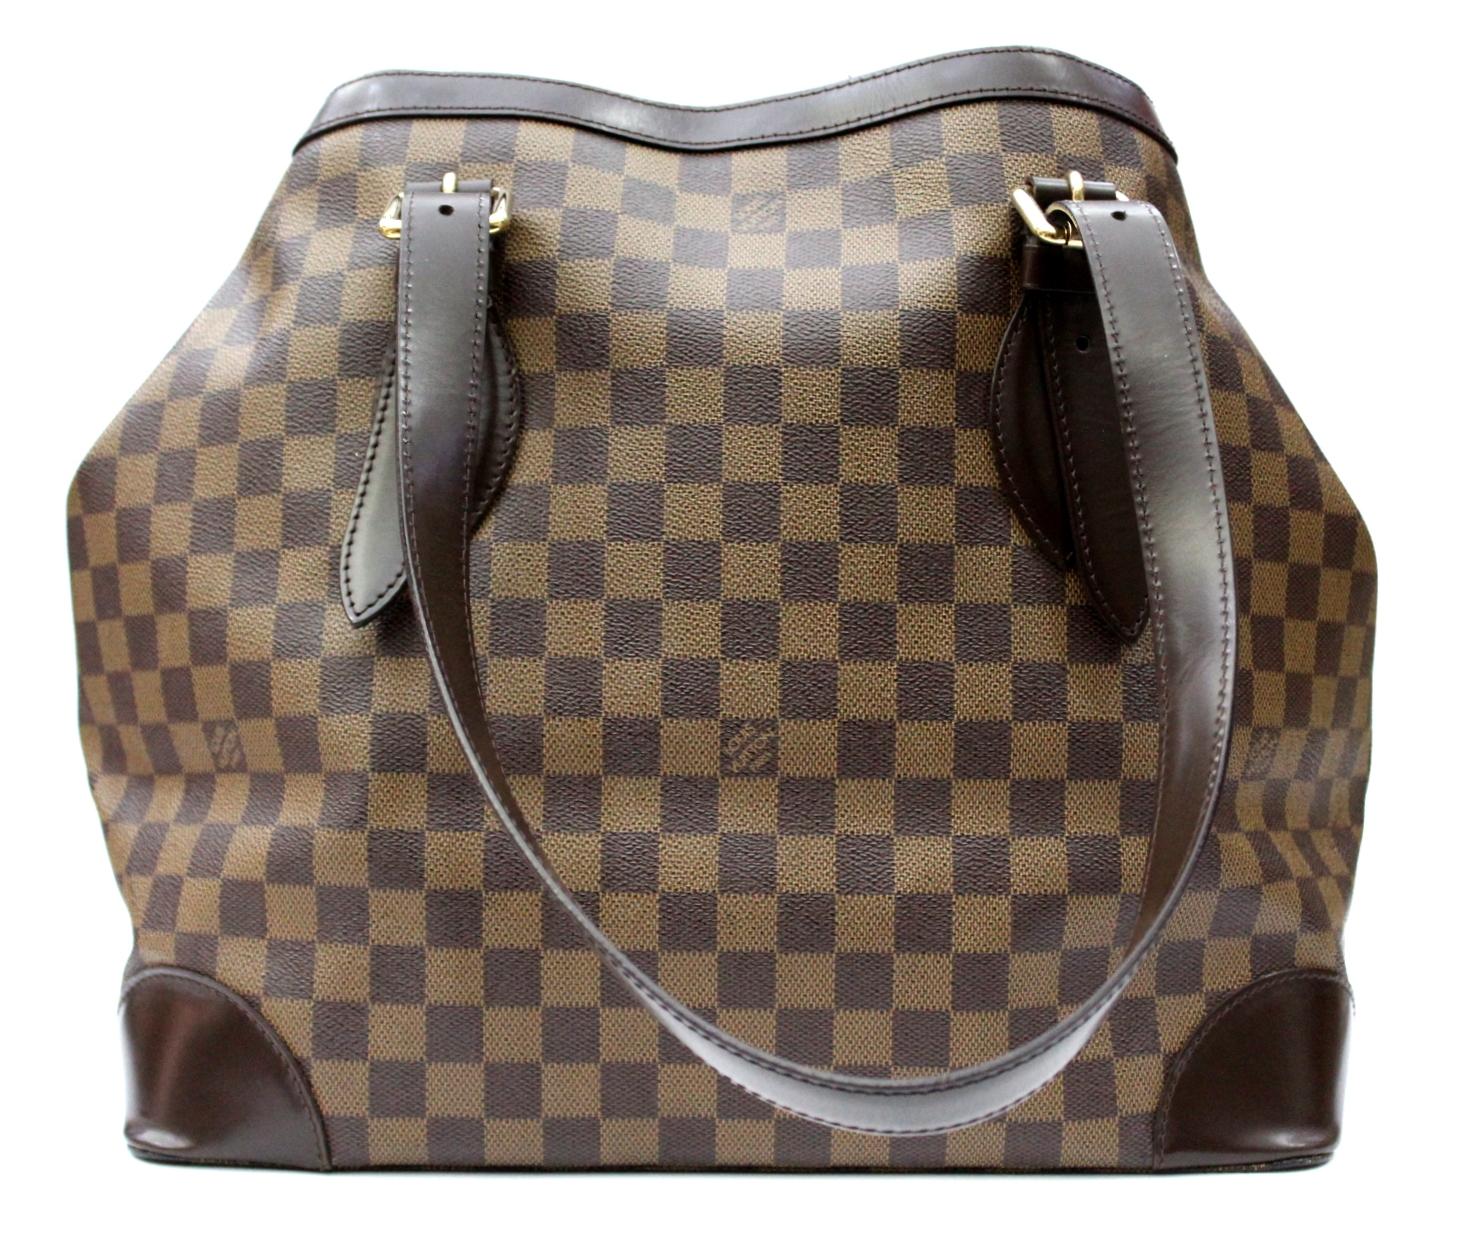 This Louis Vuitton Damier Canvas Hampstead MM Bag is the medium size of the Hampstead family and has fashion and functionality all rolled into one. With its expandable sides and roomy capacity, it is perfect for taking to the office or going